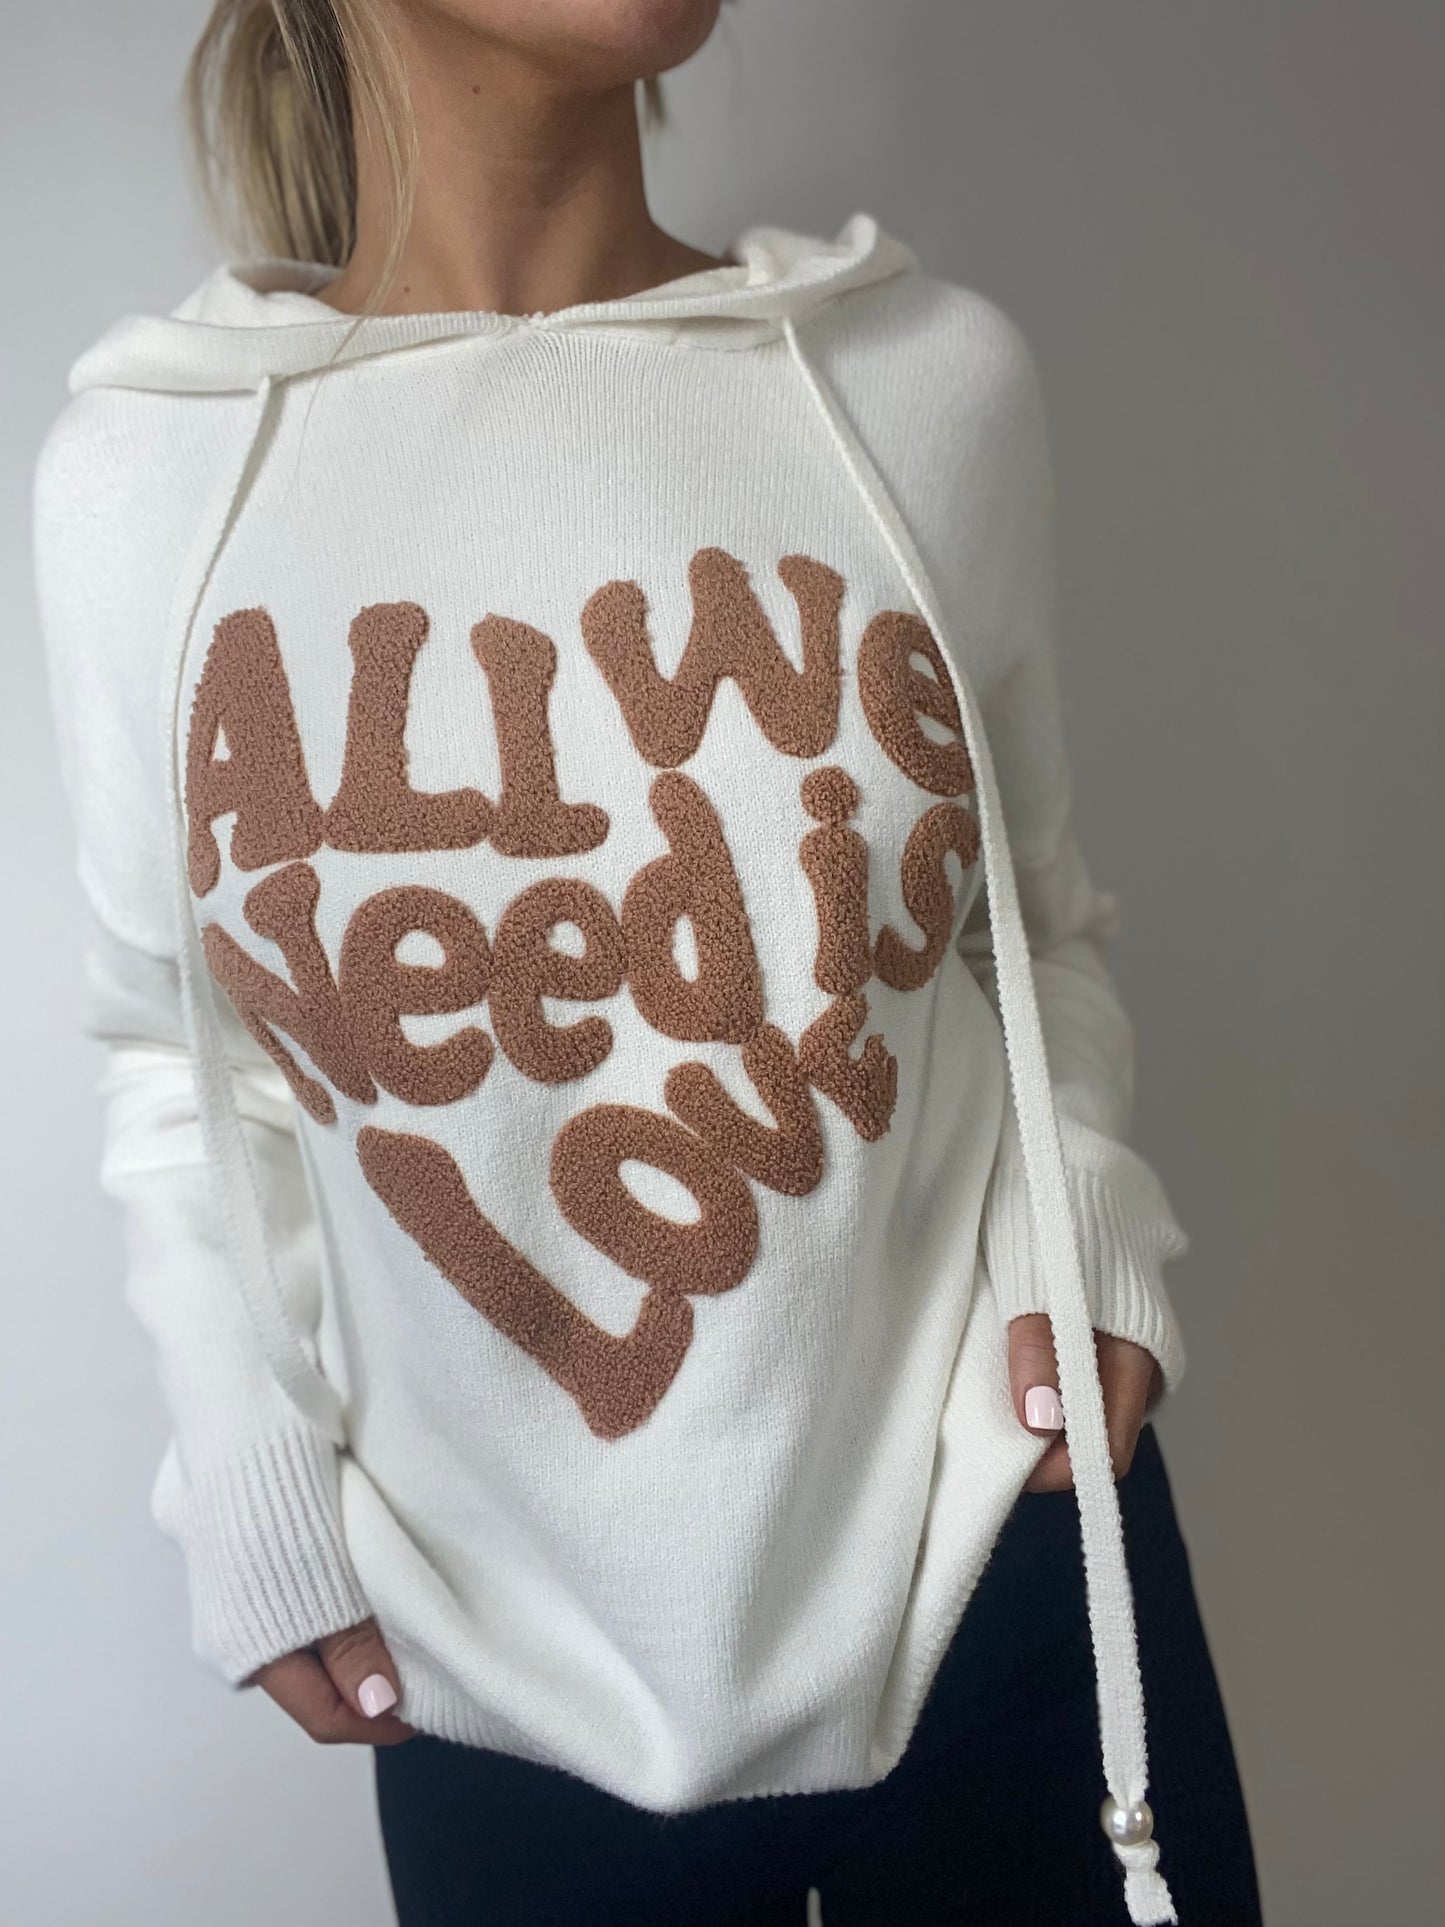 "All We Need is Love" Knit Jumper